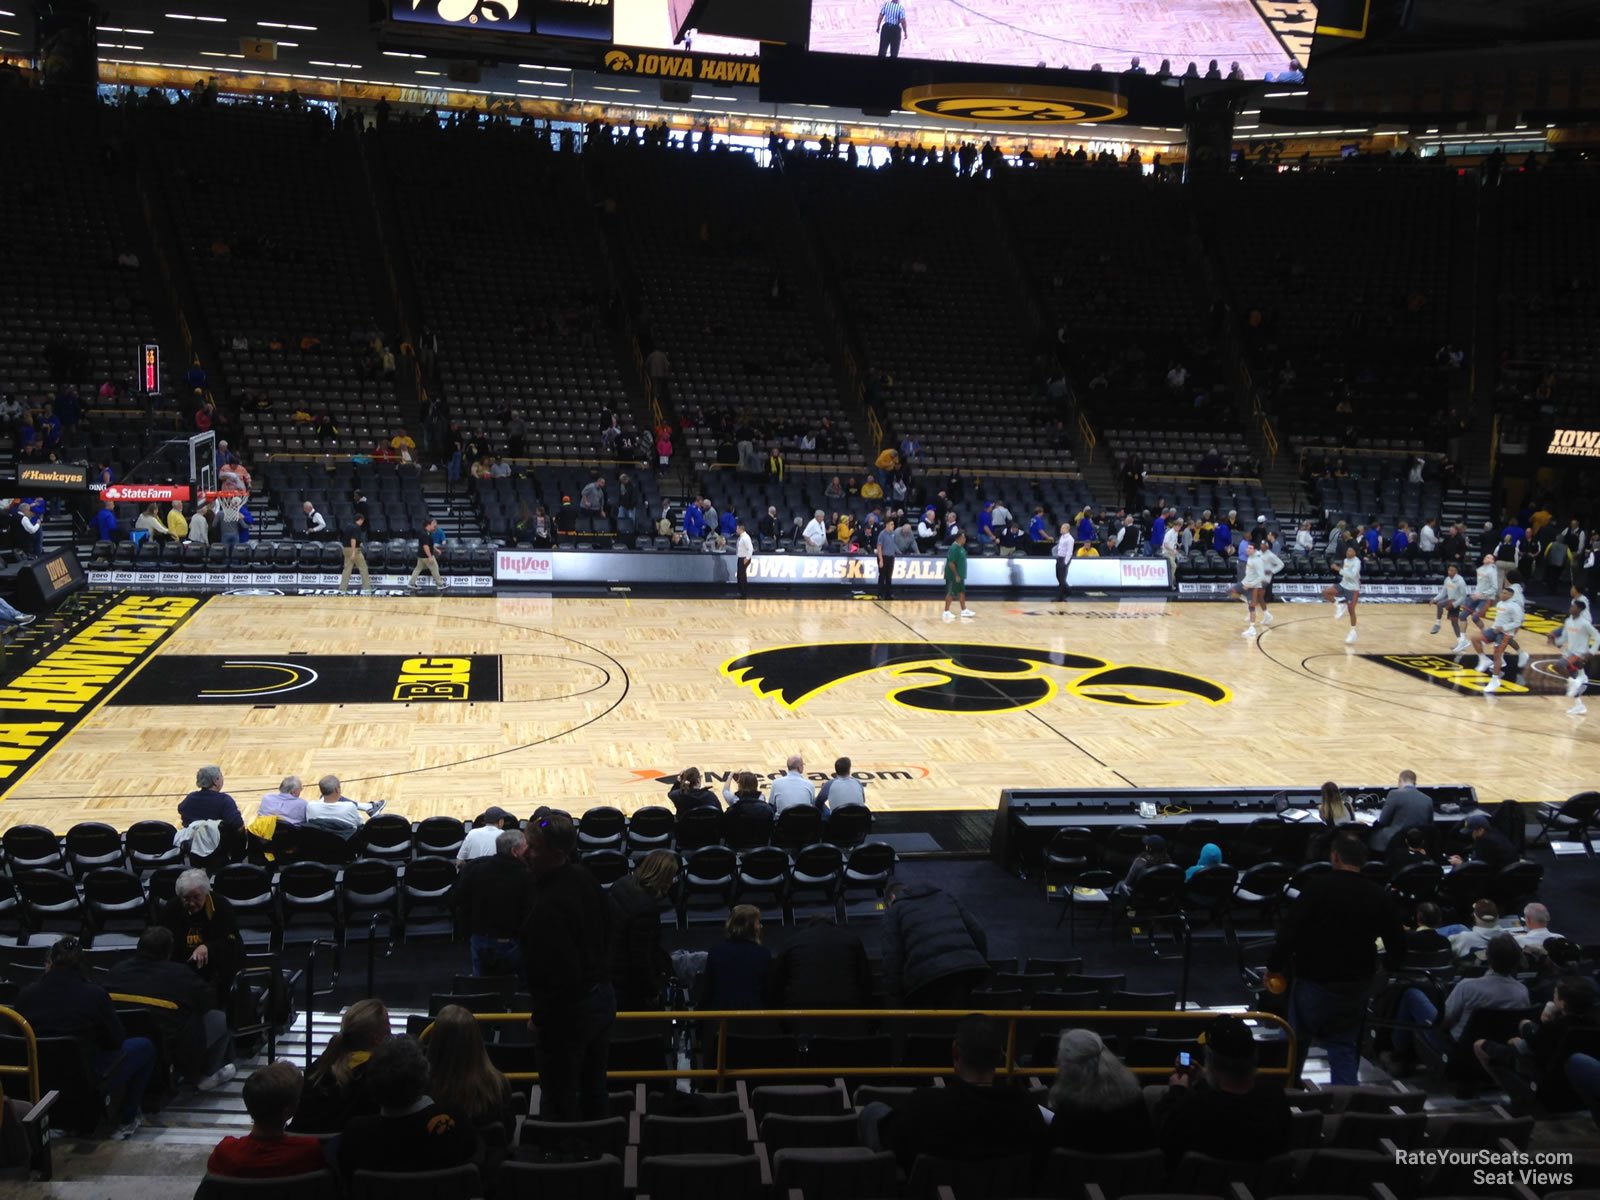 section n, row 15 seat view  - carver-hawkeye arena